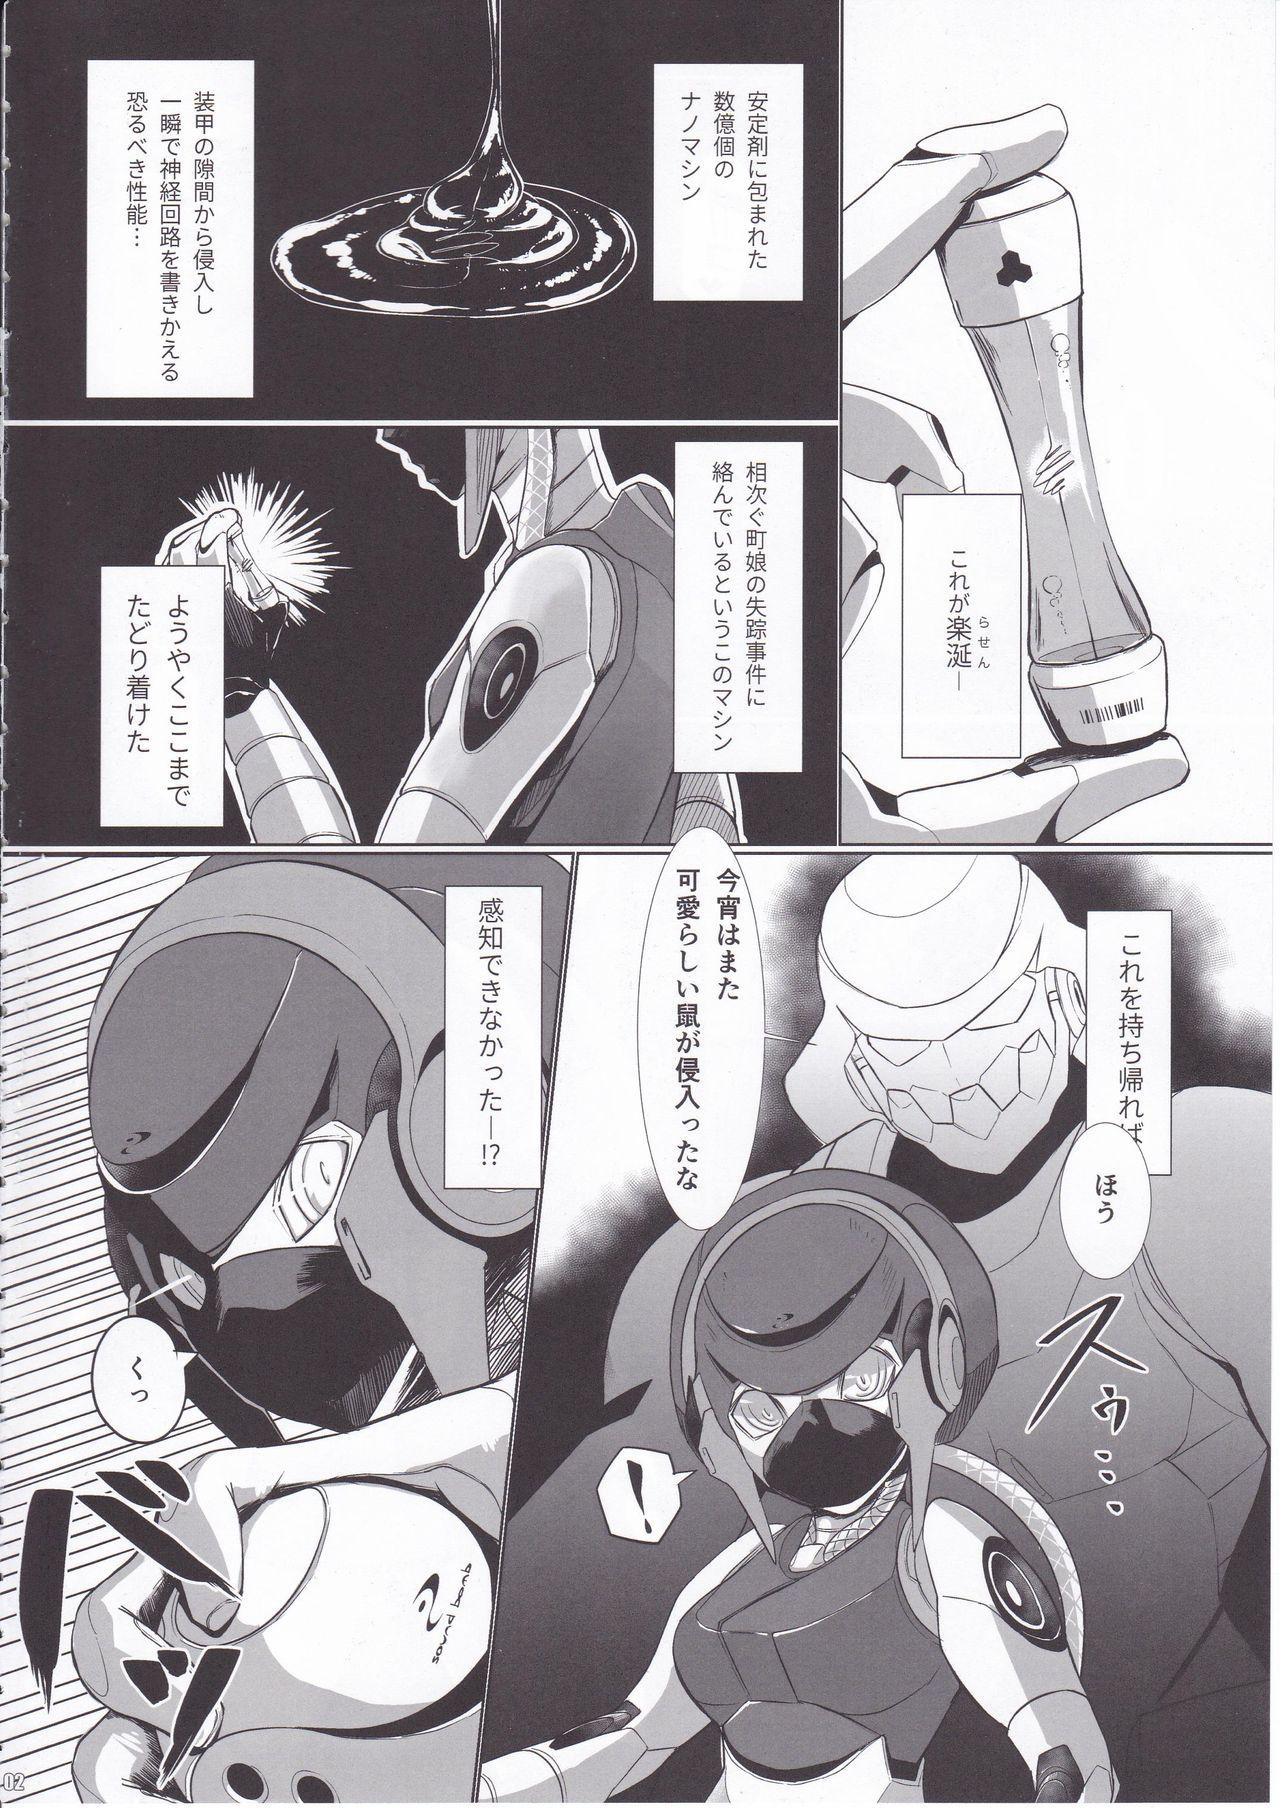 Outside Overload Girls - Medabots Perfect Butt - Page 3